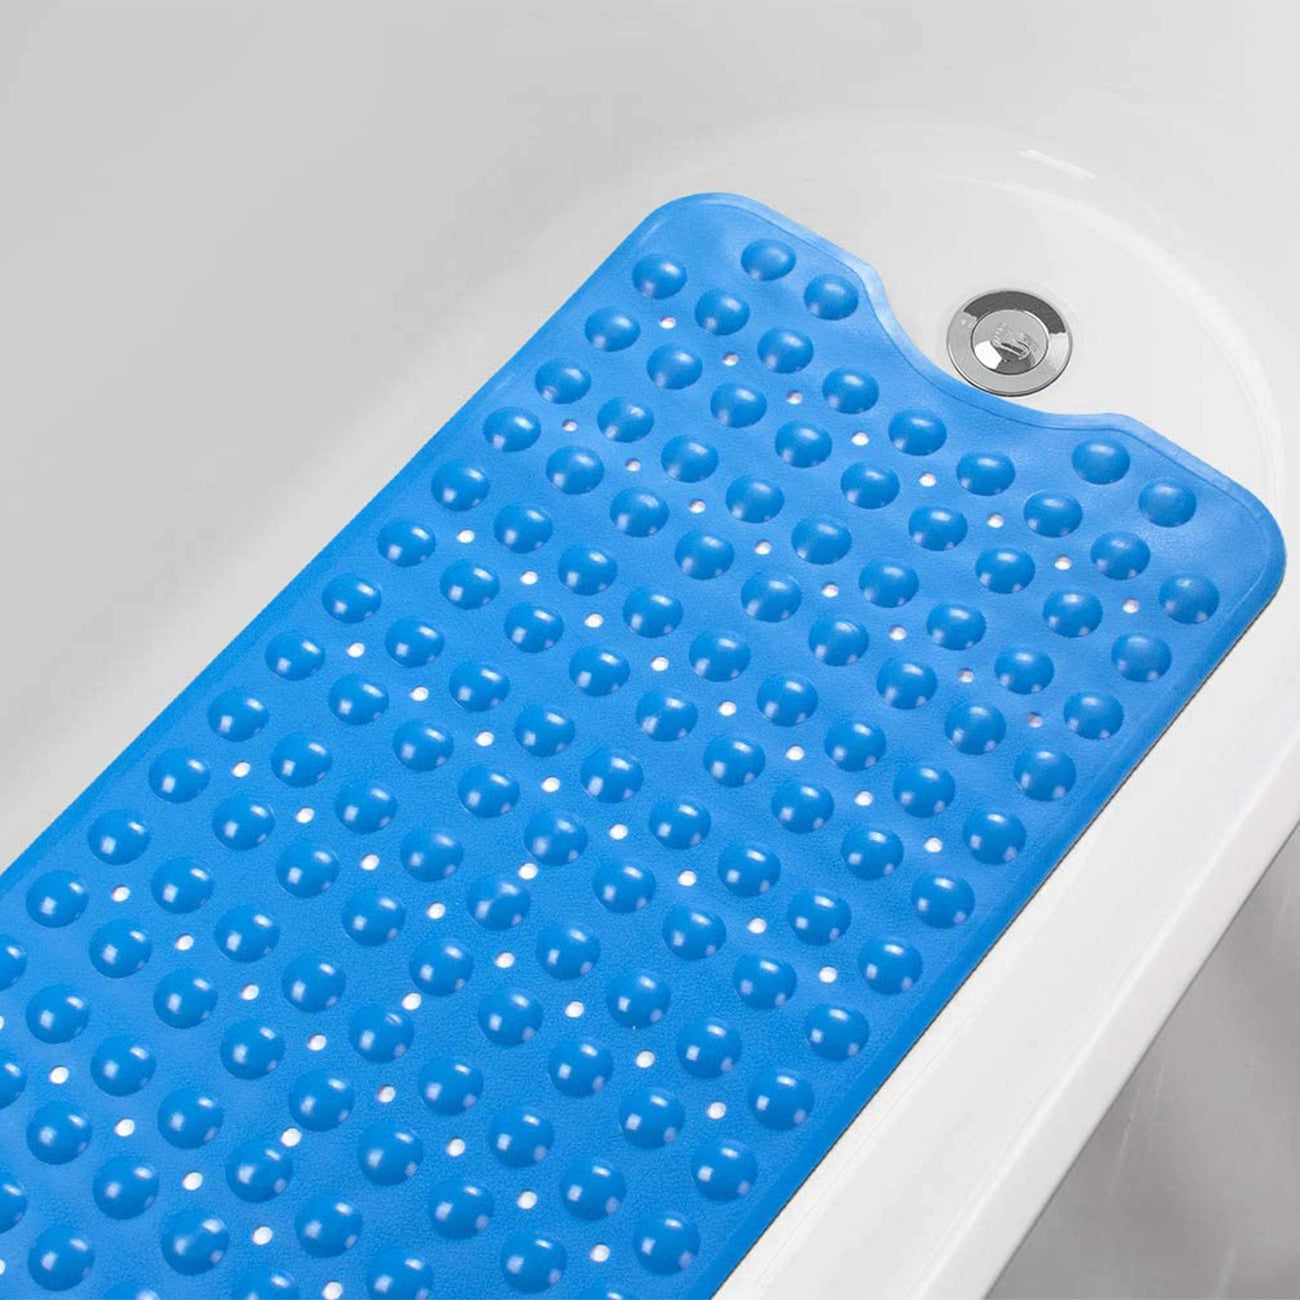 LifeKrafts Experia Anti-Slip with Suction Cup Bath Mat, 100*40cm (Blue Color with Soft-Pebble) LifeKrafts